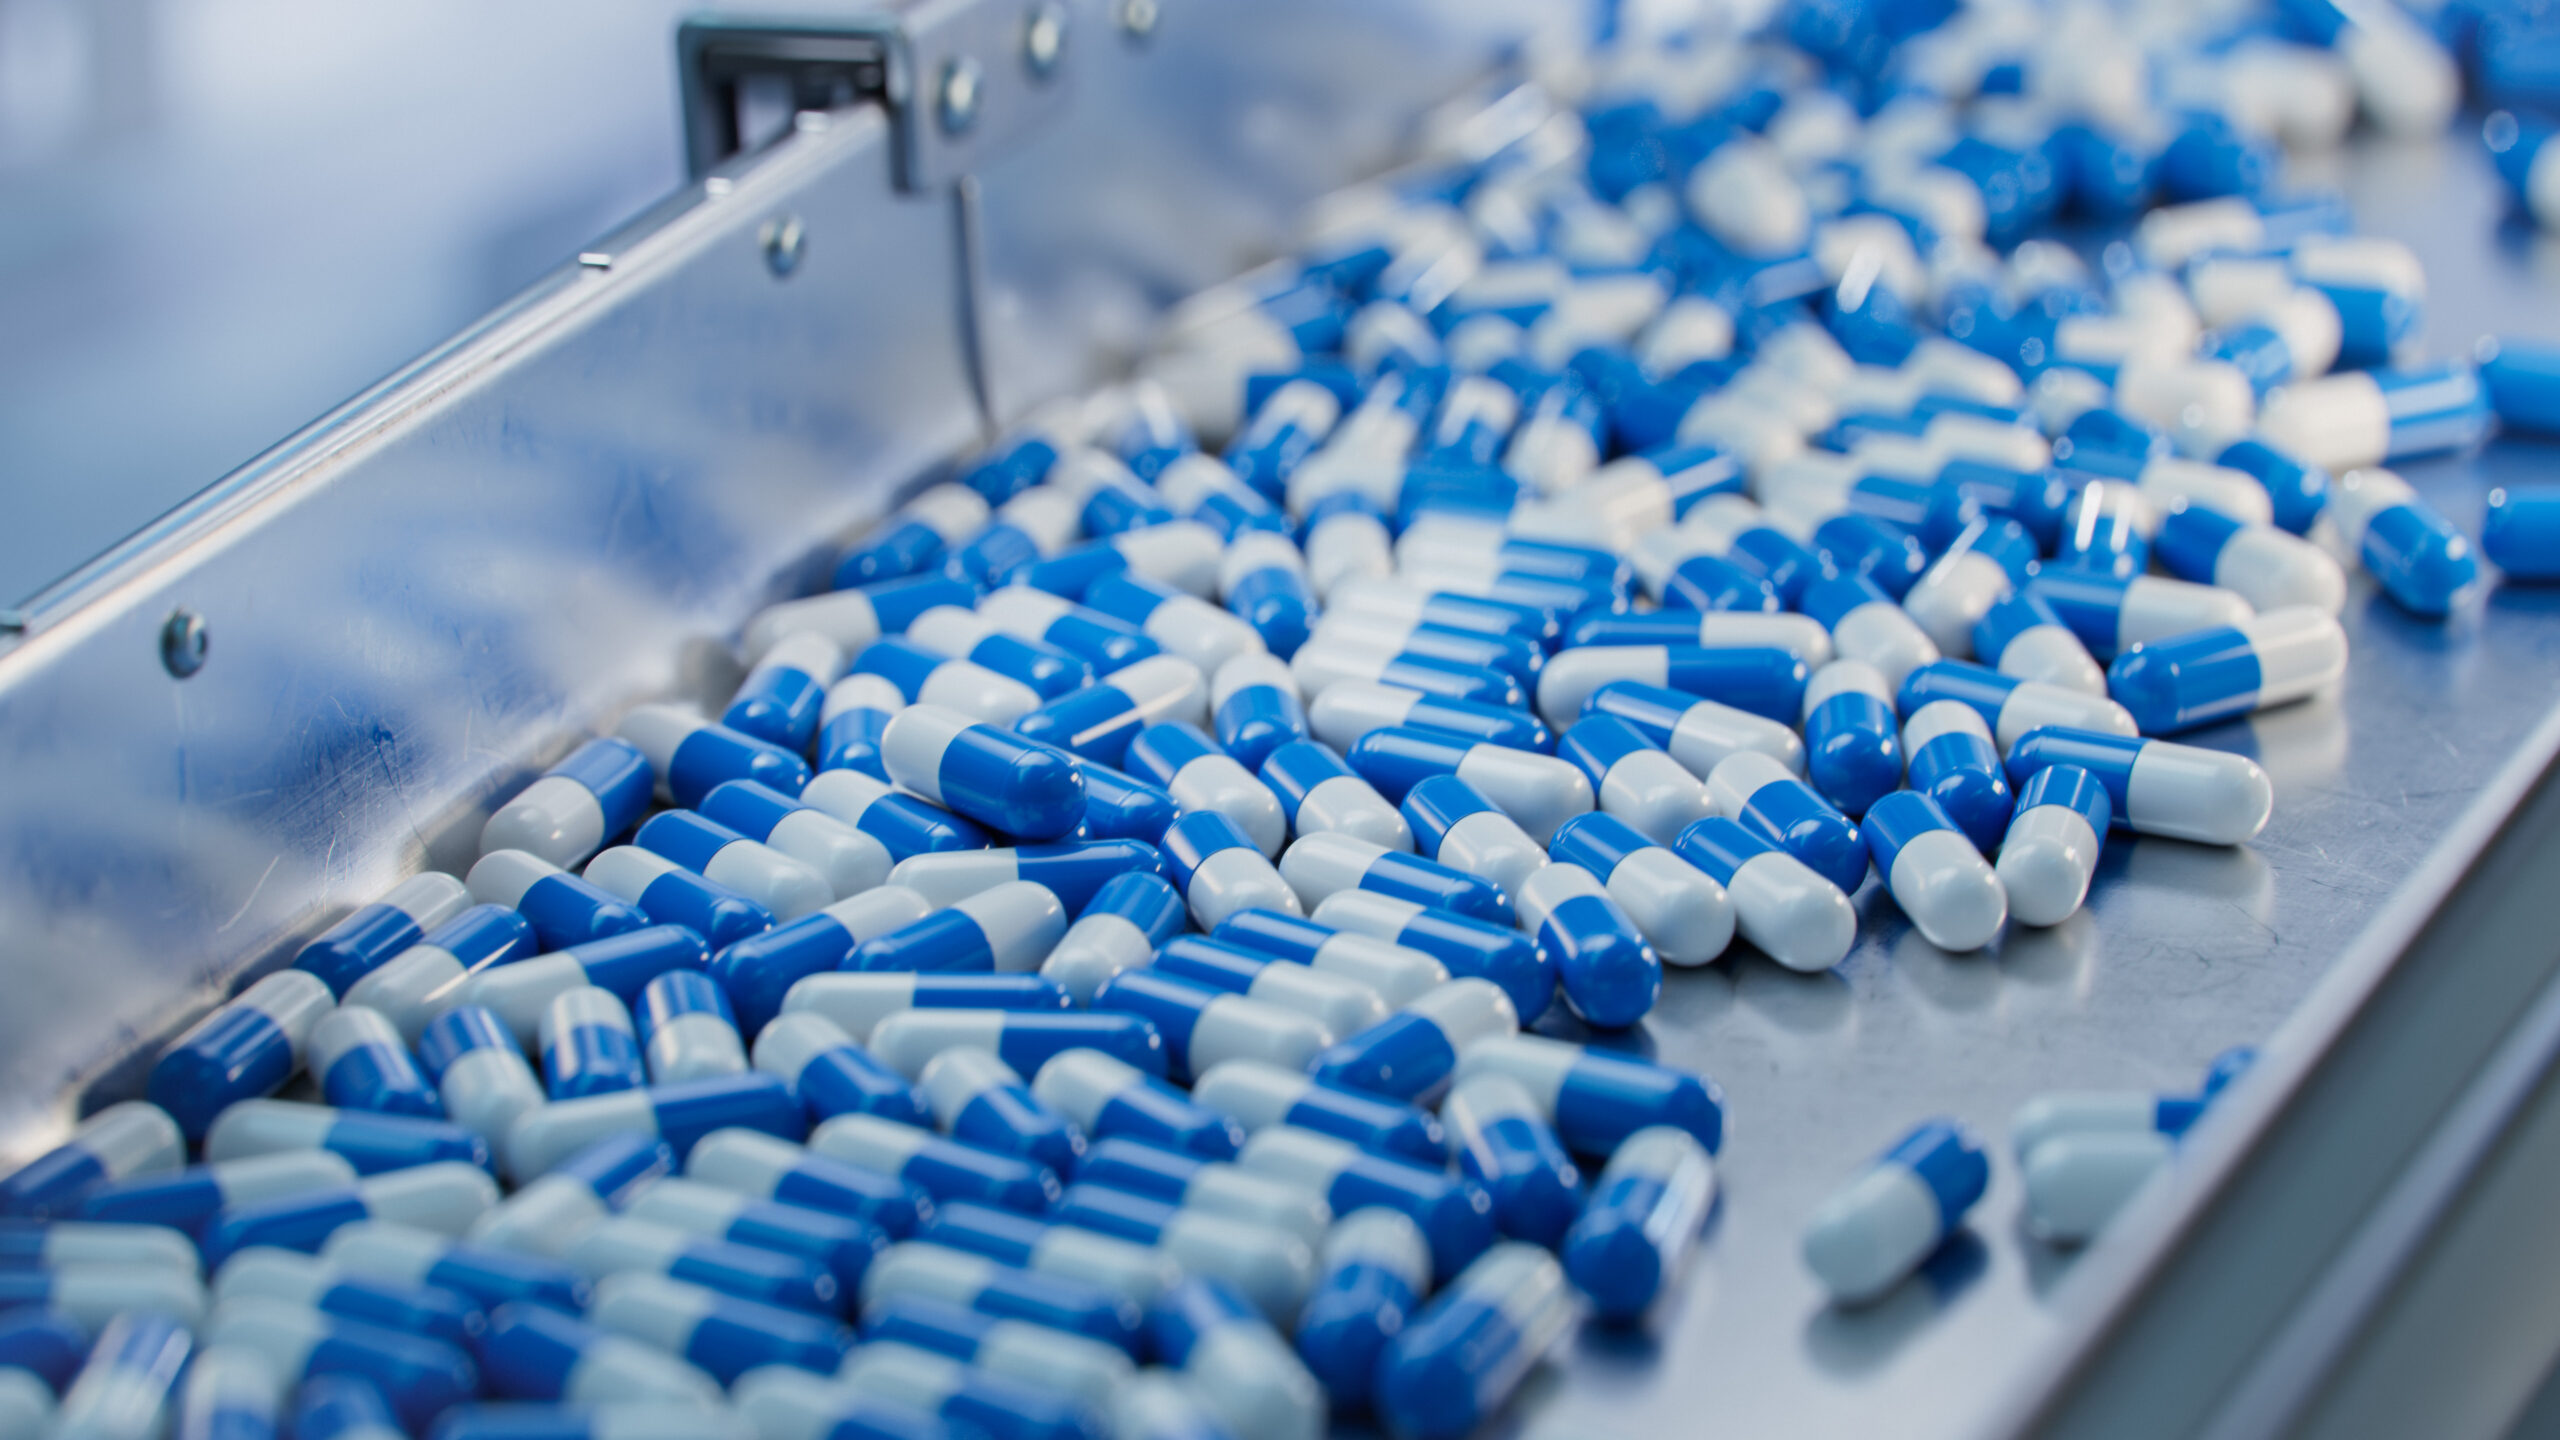 Blue Capsules are Moving on Conveyor at Modern Pharmaceutical Fa